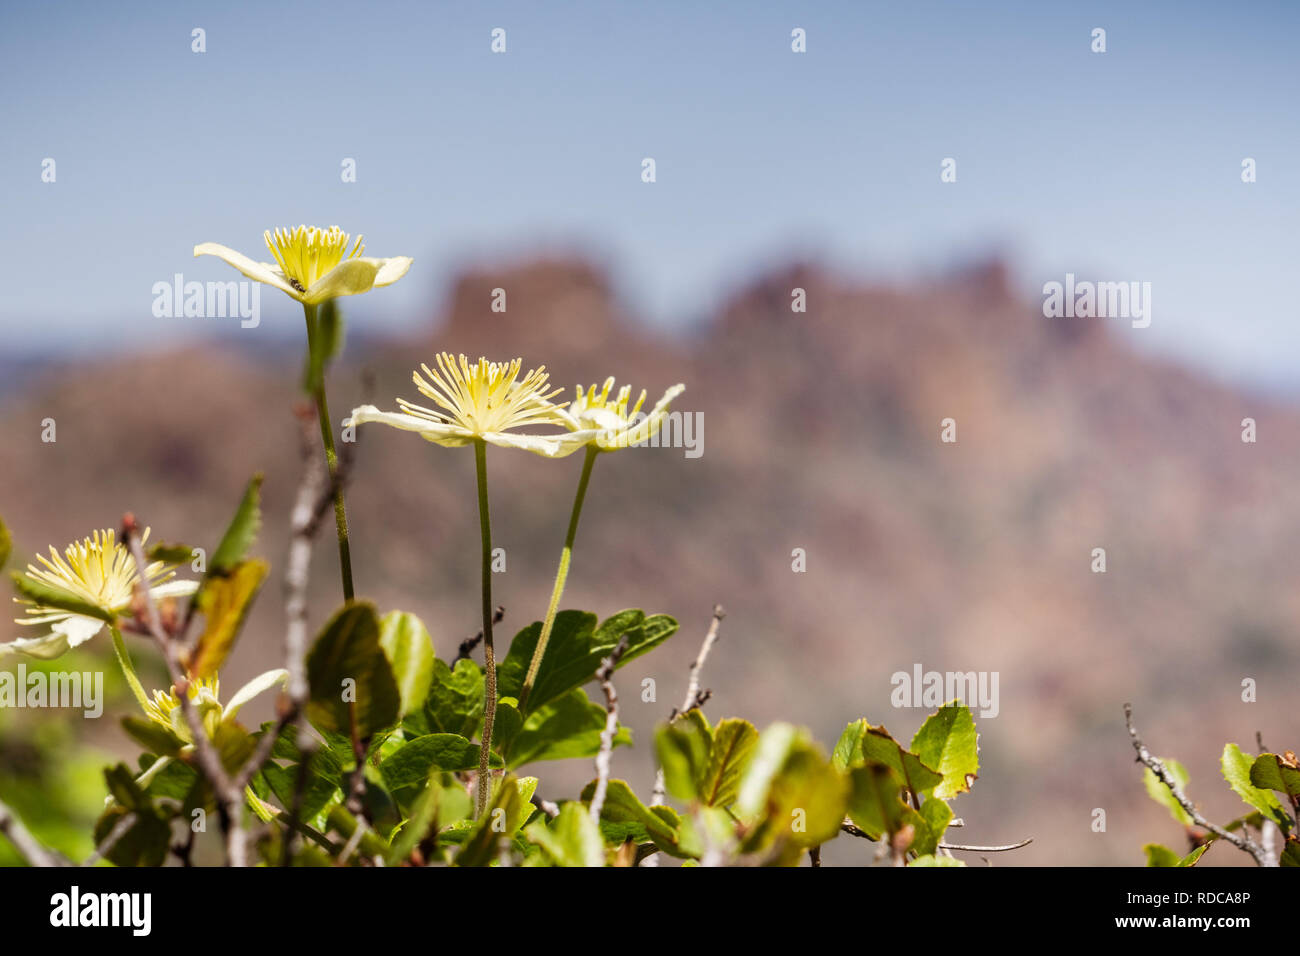 Clematis lasiantha (Pipestem Clematis) blooming in spring, blurred rocks and blue sky background, Pinnacles National Park, California Stock Photo